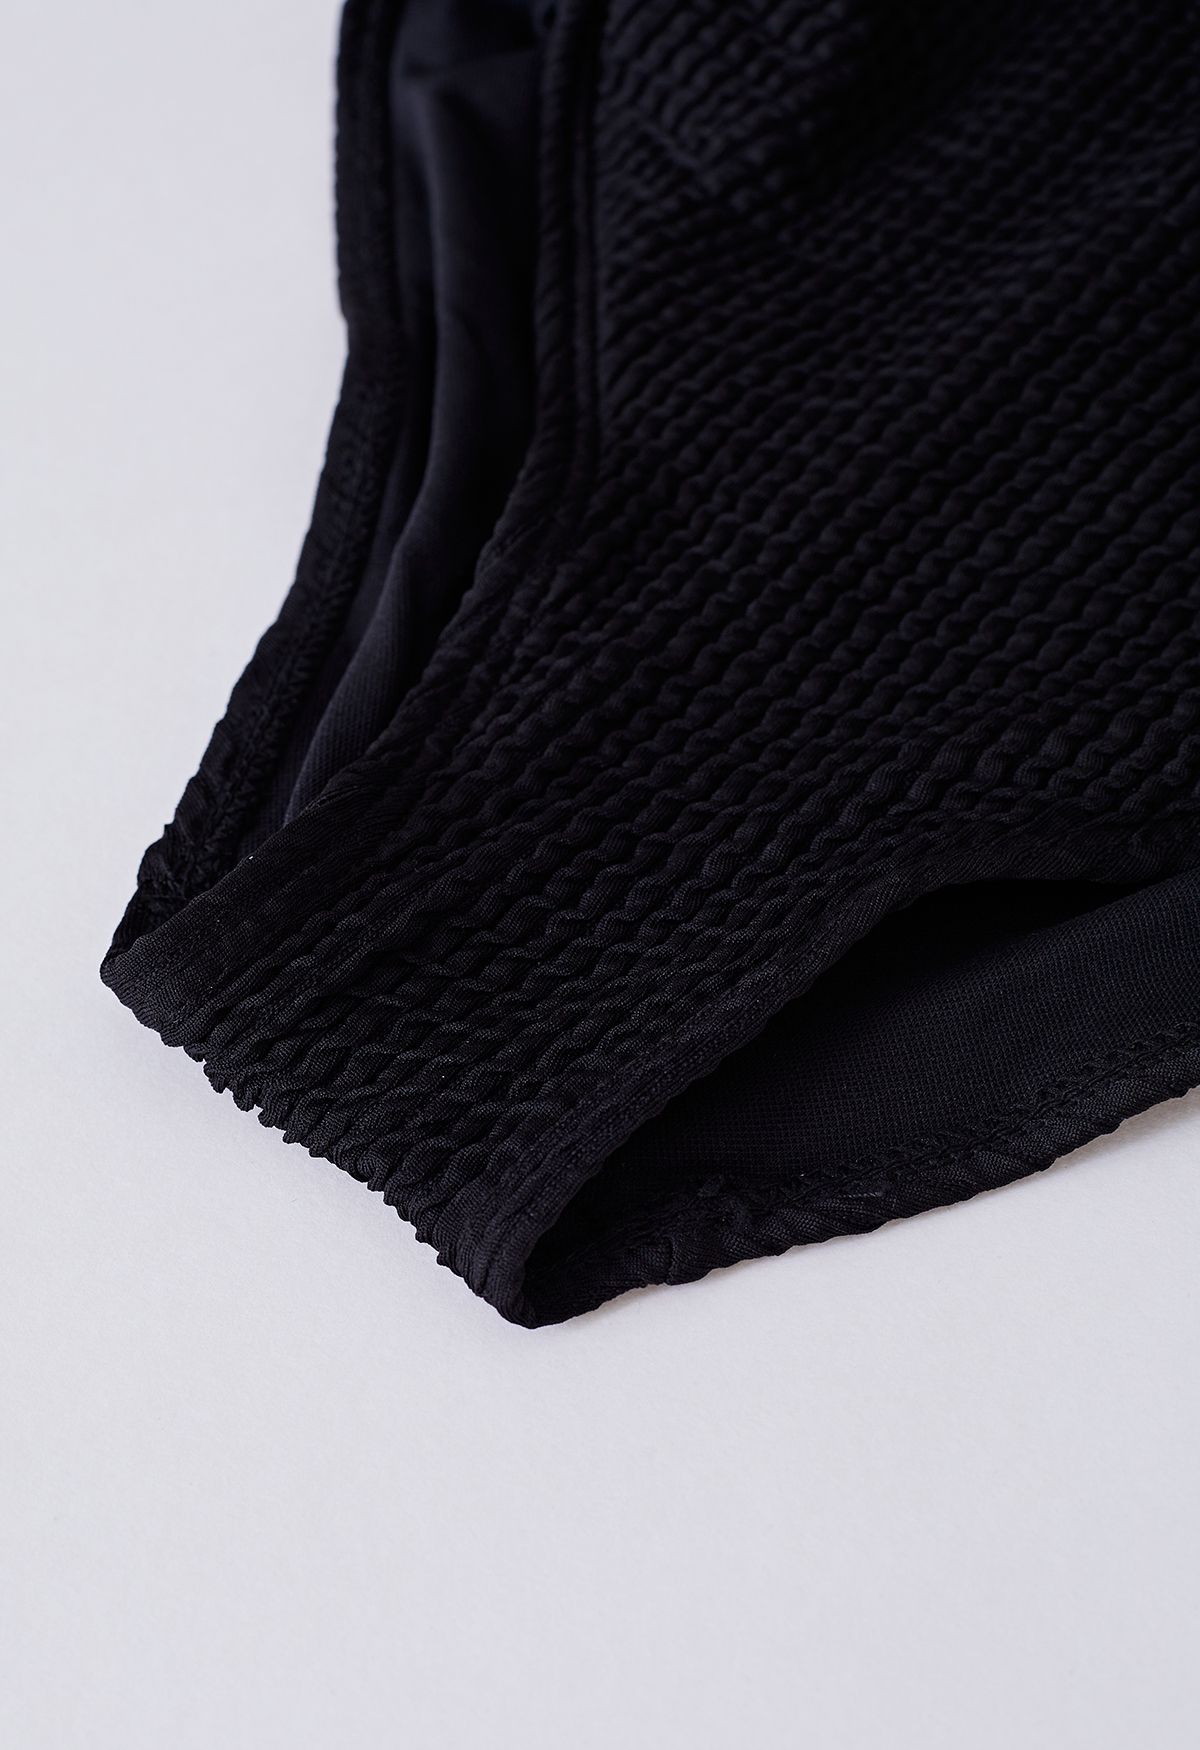 Twisted Cutout Wavy Textured Swimsuit in Black